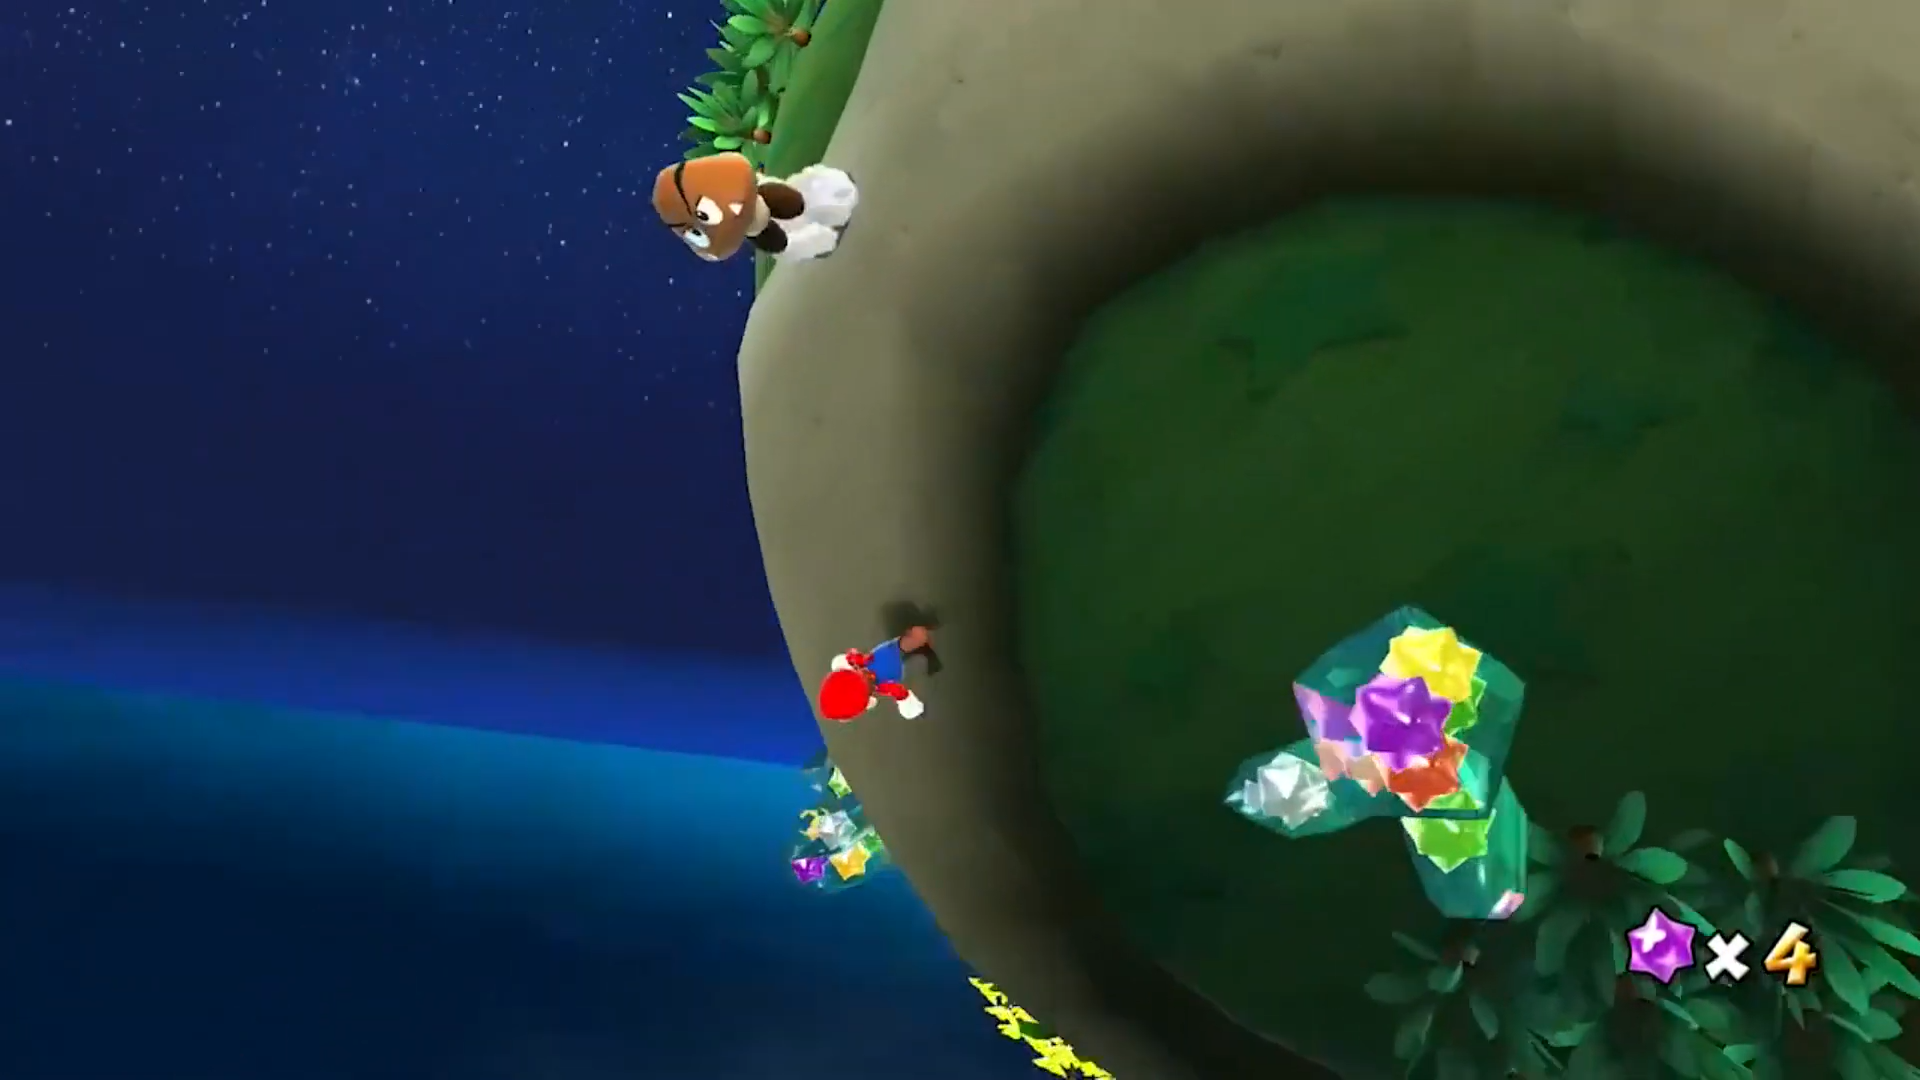 New Footage For Super Mario Galaxy In Super Mario 3D All Stars Reveals That Mario Can Spin By Pressing The Y Button